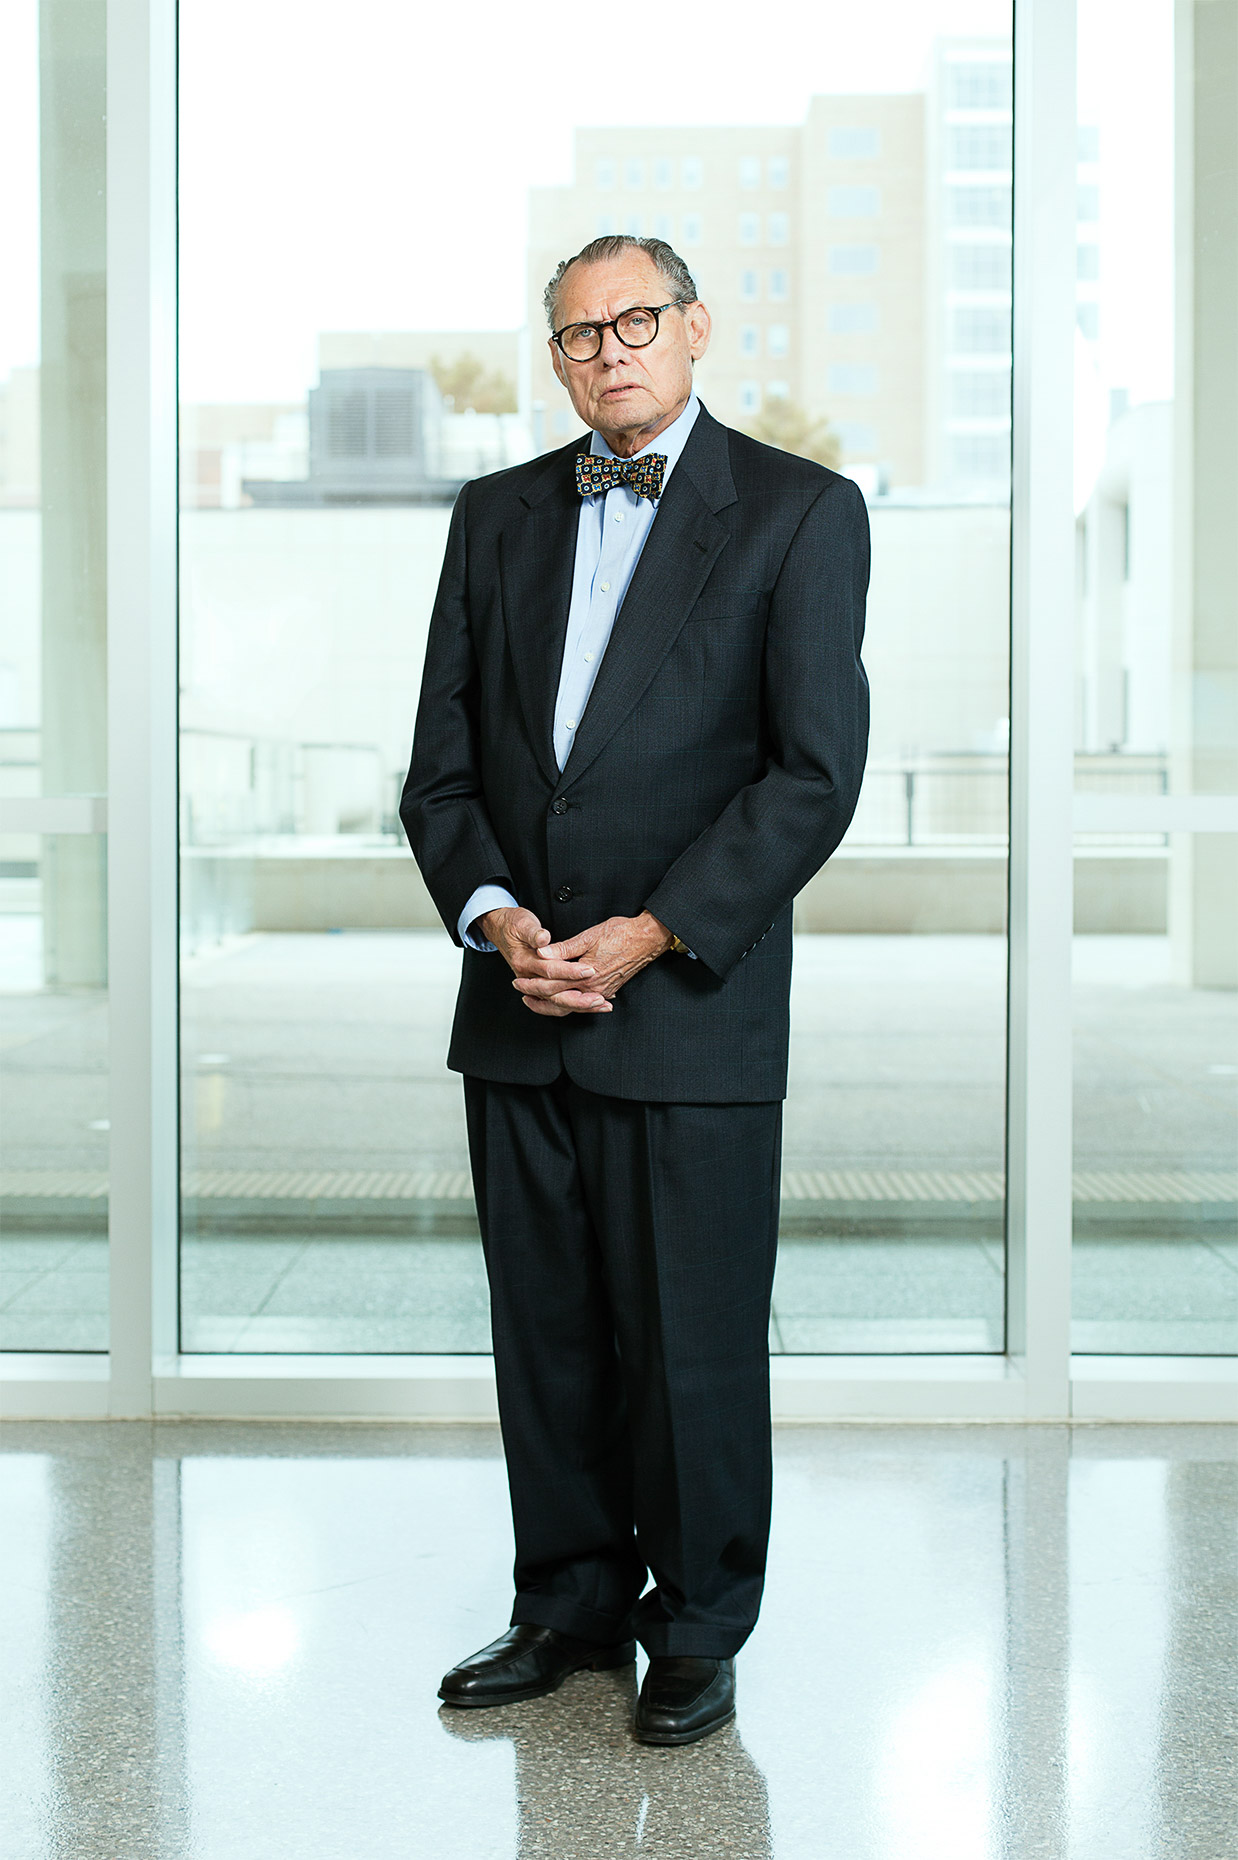 Dr. Robert Floyd, scientist with the Oklahoma Medical Research Foundation.  Brett Deering Photography